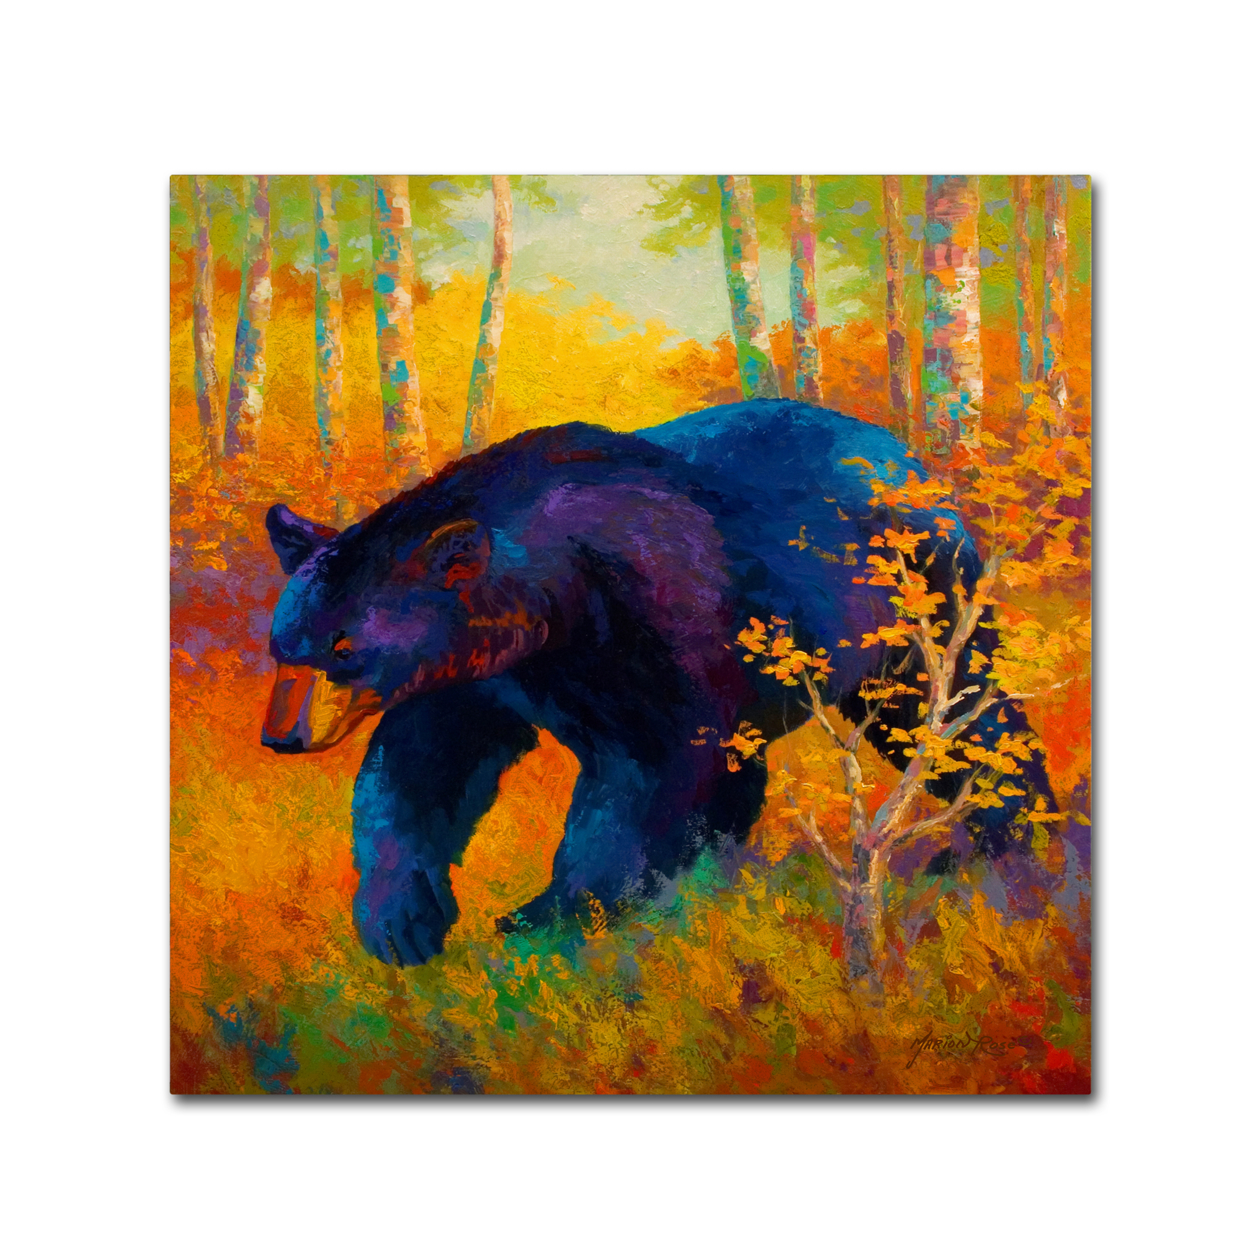 Marion Rose 'In To Spring Black Bear' Ready To Hang Canvas Art 24 X 24 Inches Made In USA